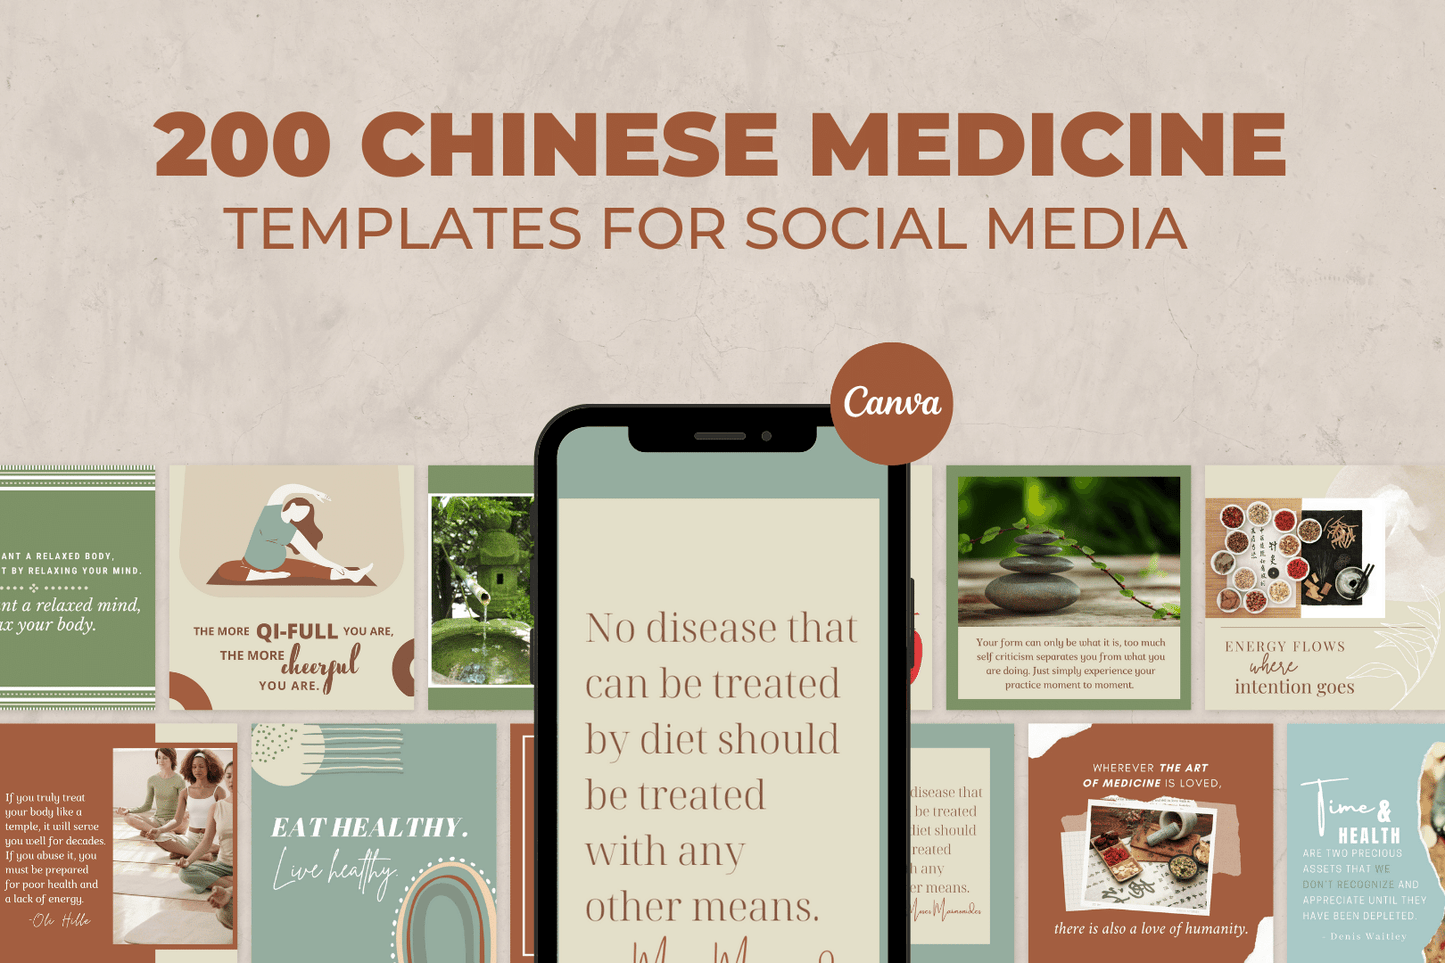 200 Chinese Medicine Templates for Social Media